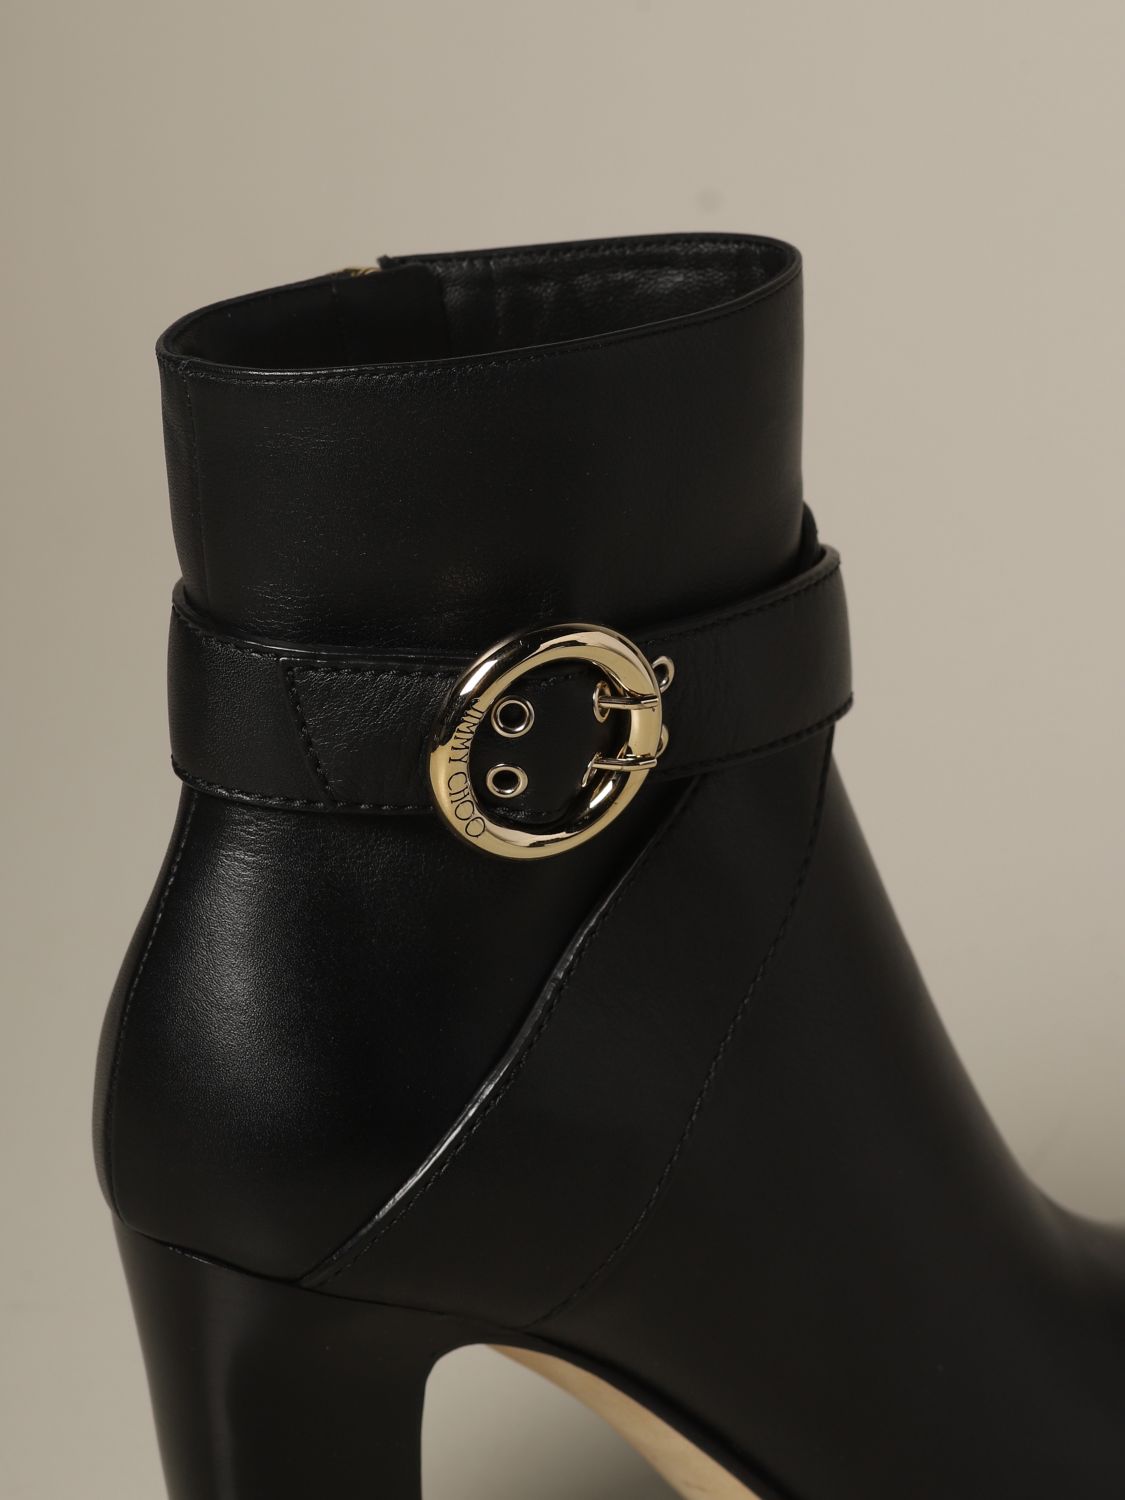 black heeled boots with buckles